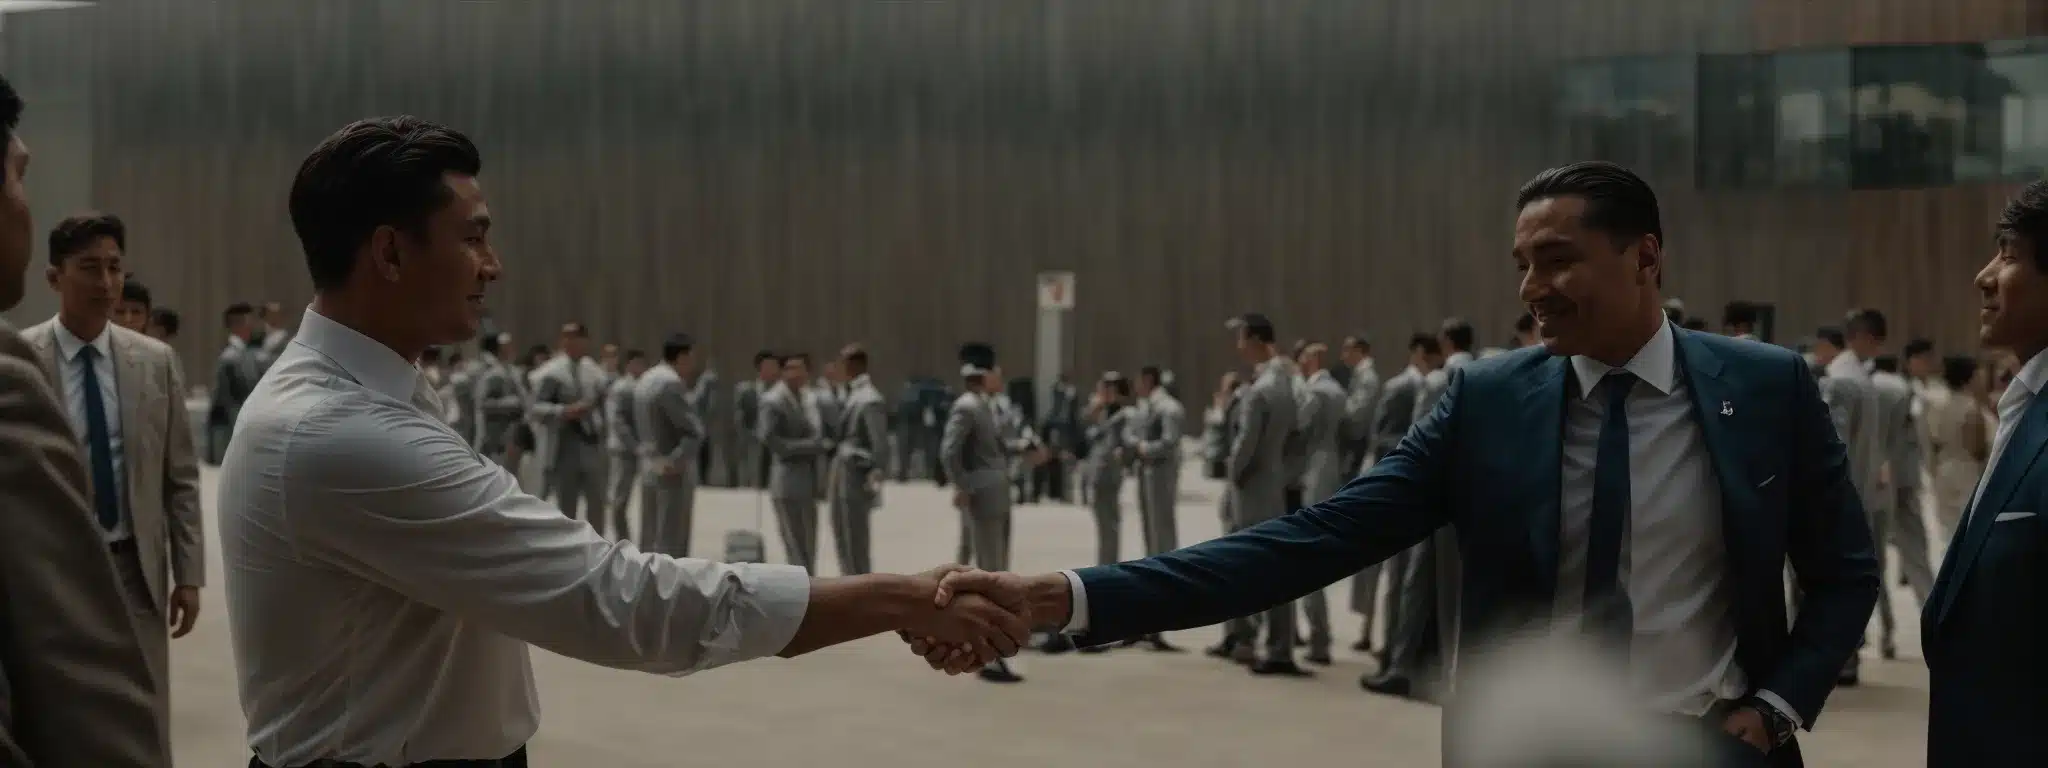 Two Executives Shaking Hands In Front Of Their Teams, Symbolizing A New Partnership.